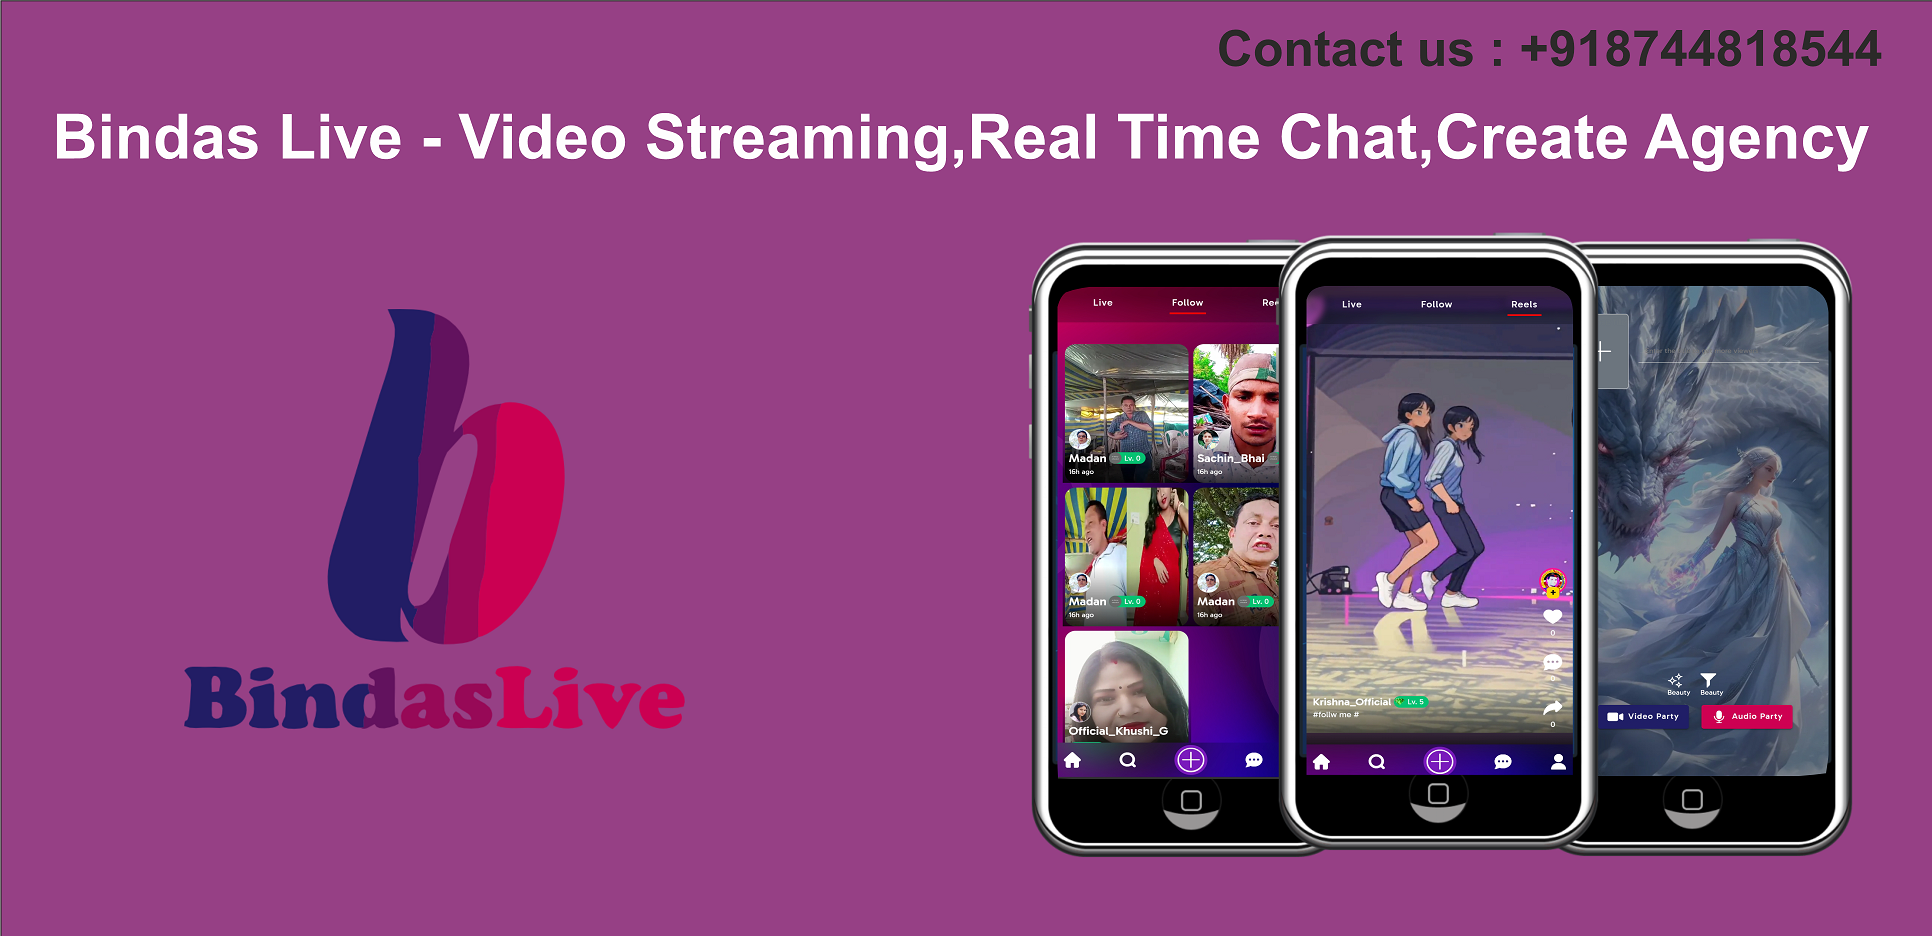 Creating an Agency on Bindas Live App | Live Streaming Video & Audio Party on Bindas Live App รูปที่ 1